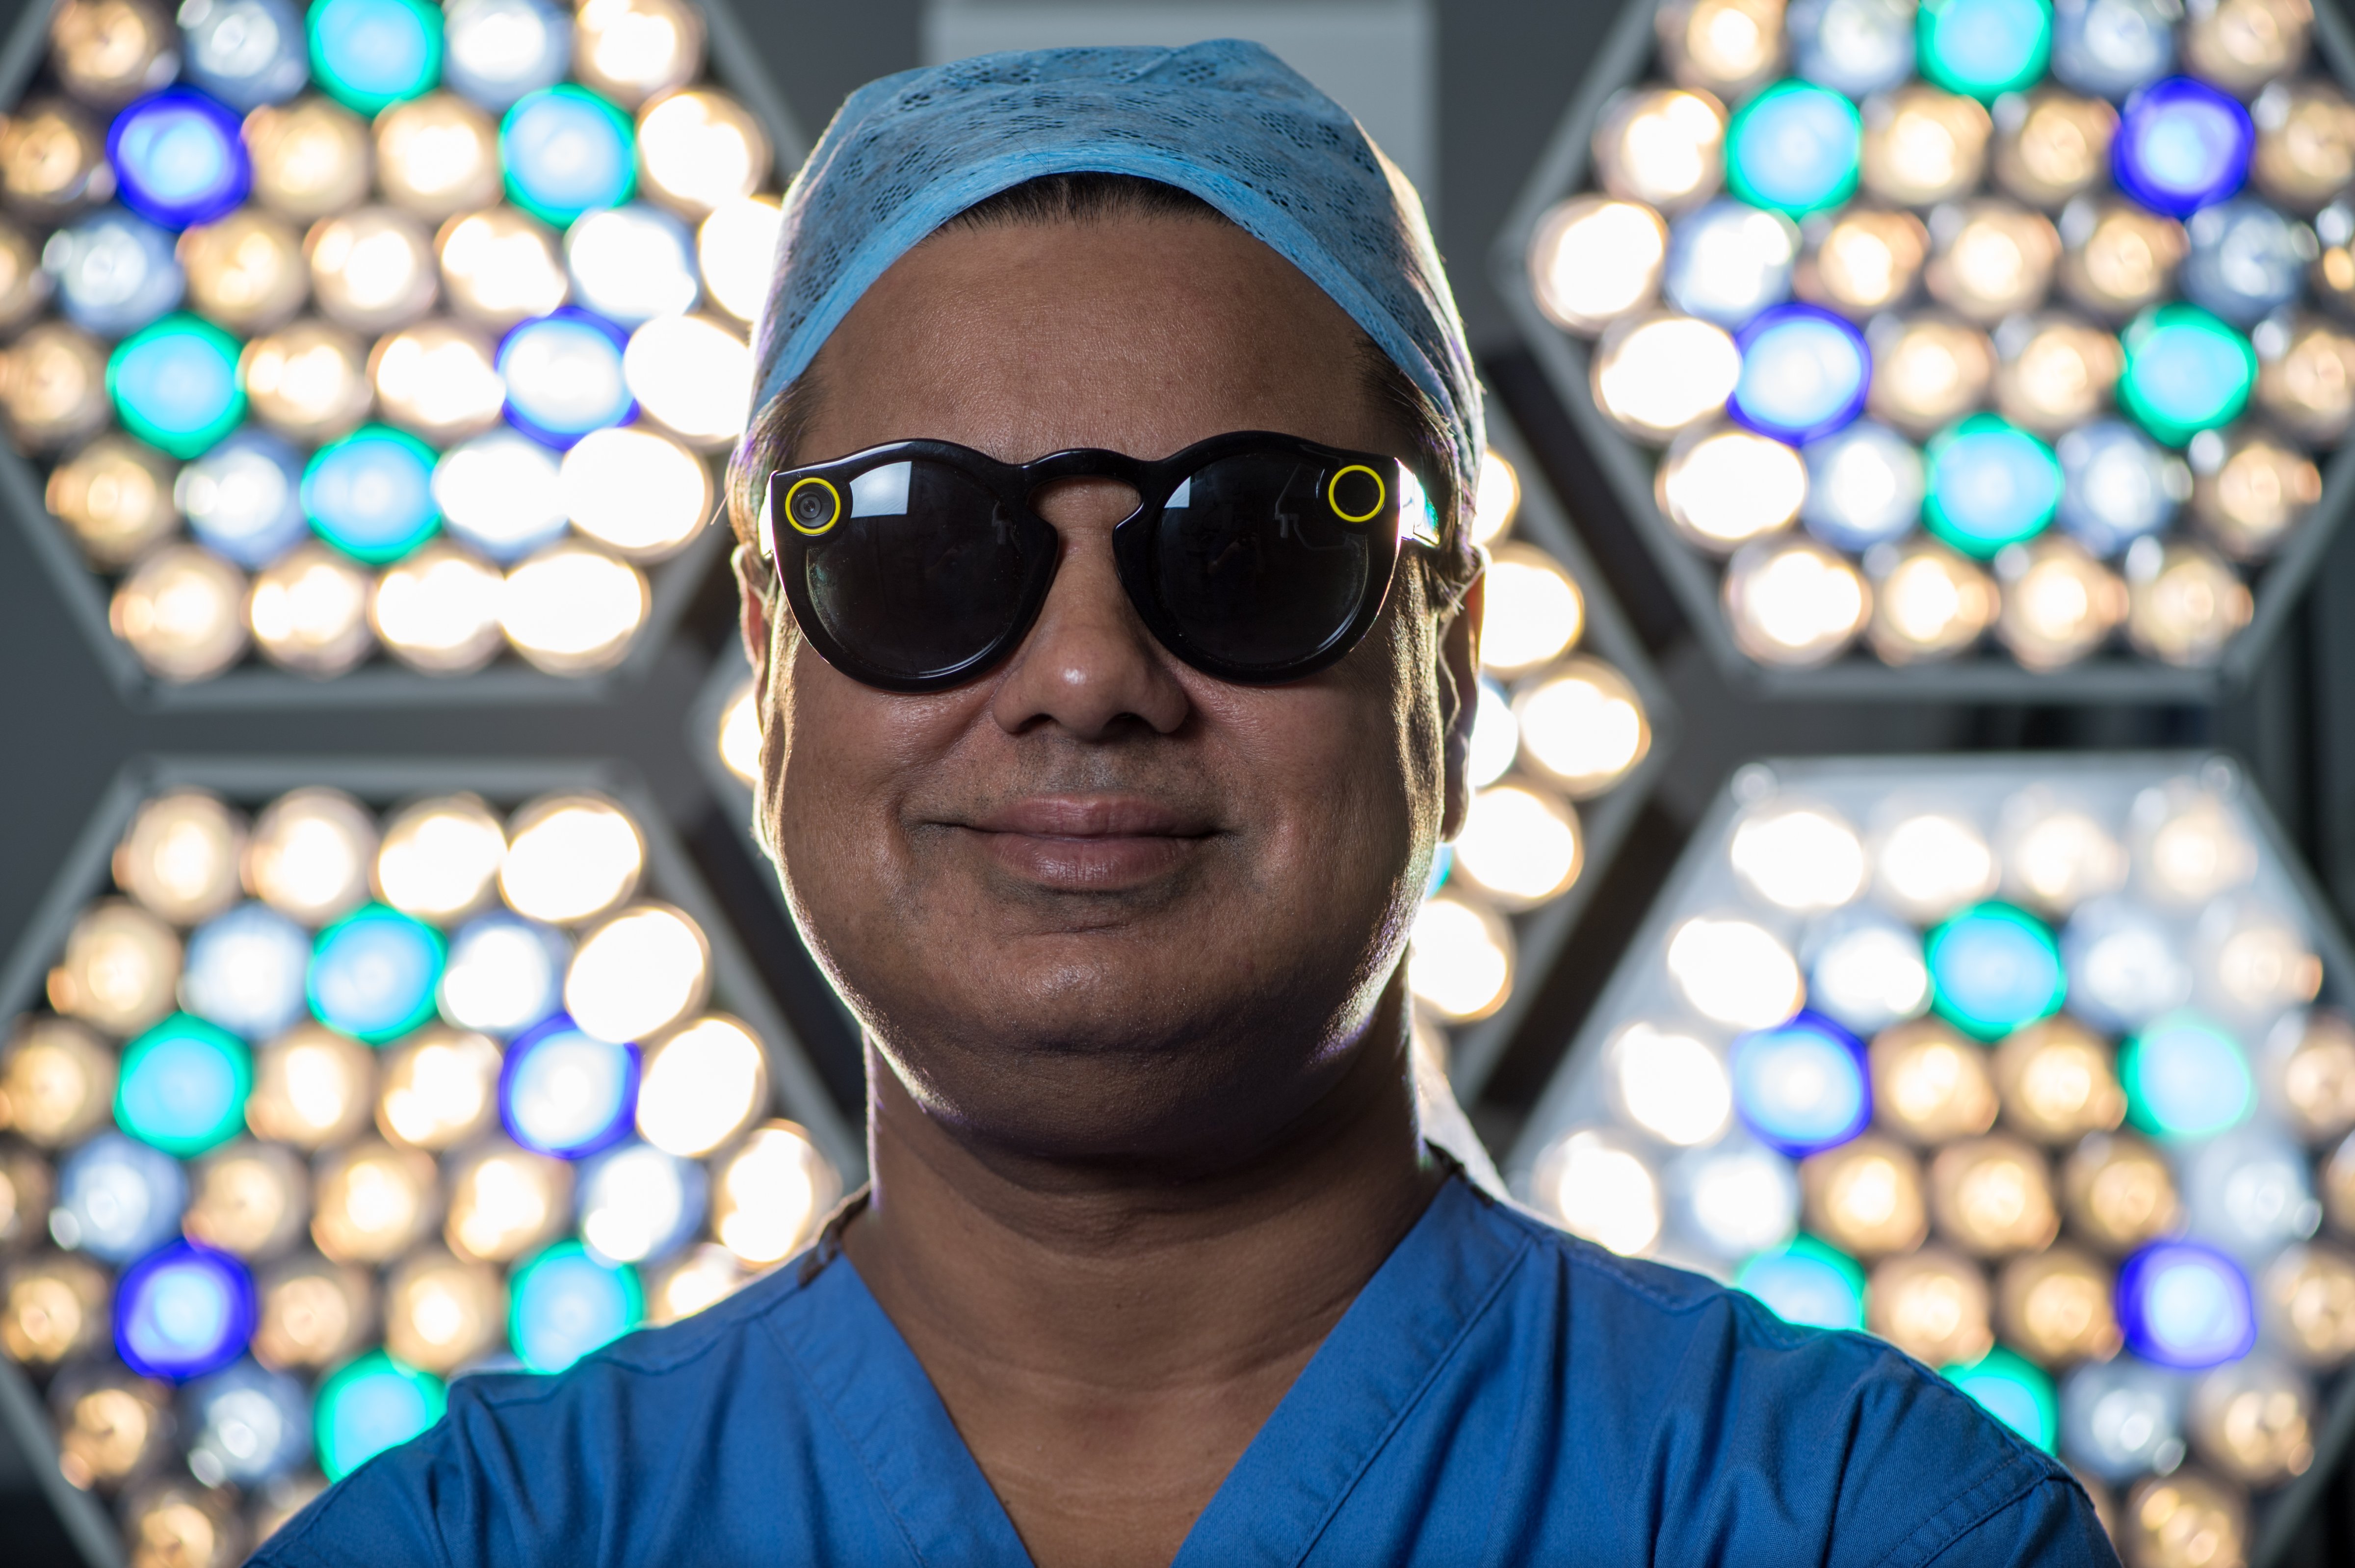 Surgeon Shafi Ahmed poses for a photograph wearing a pair of Snap Inc. Spectacles inside his operating theater at the Royal London Hospital, part of the Barts Health NHS Trust, in London, U.K., on Thursday, Jan. 11, 2018. (Chris J. Ratcliffe&mdash;Bloomberg/Getty Images)